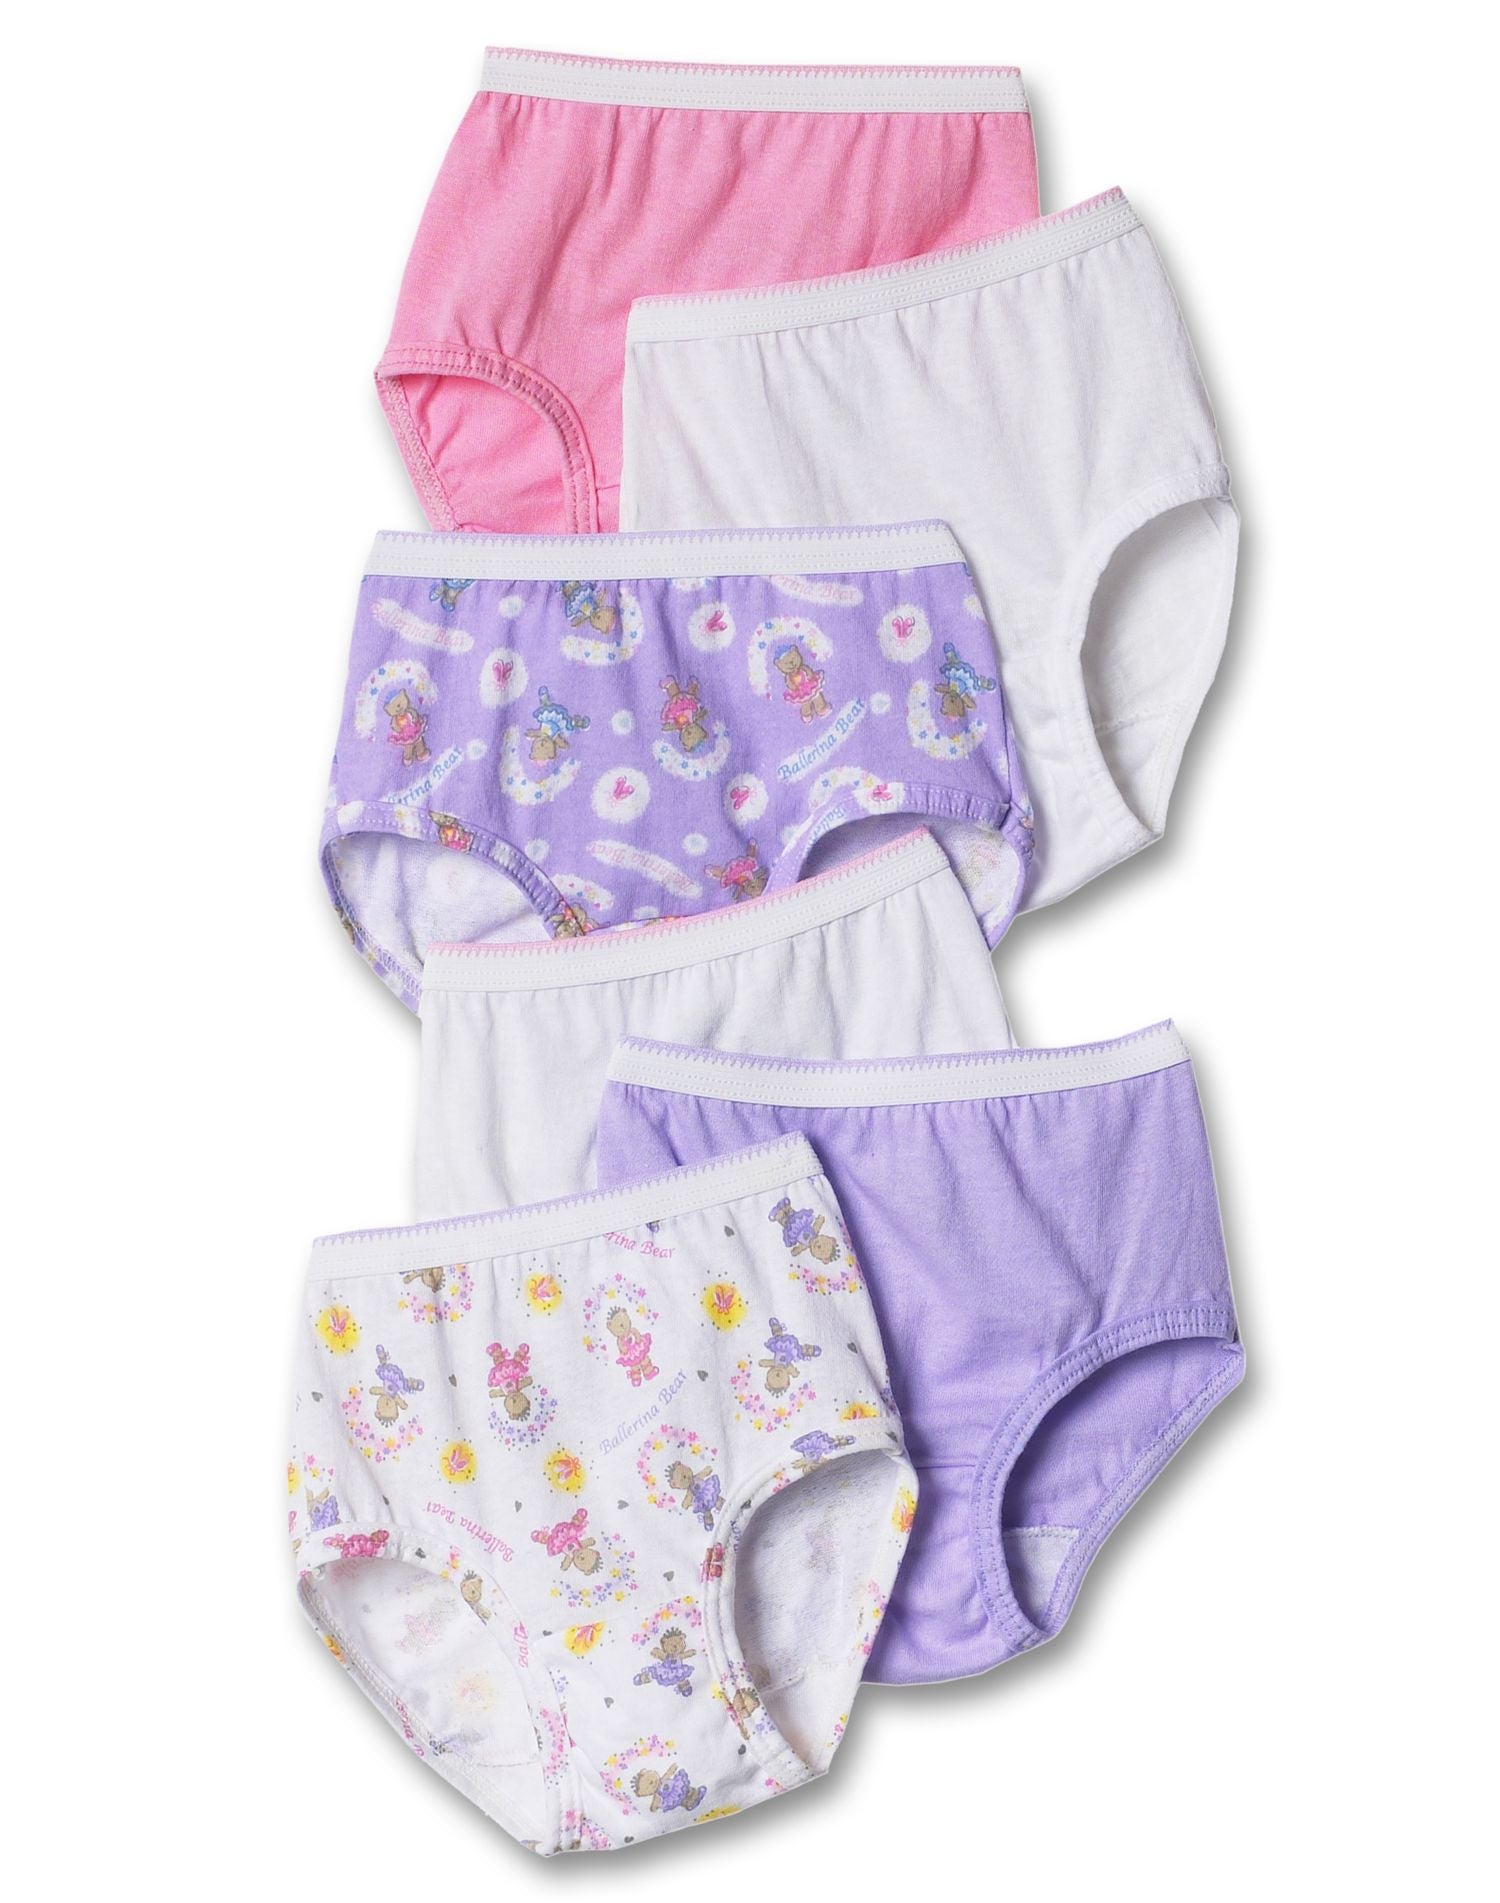 Hanes girls Cotton Tagless Low Rise Brief 6-Pack